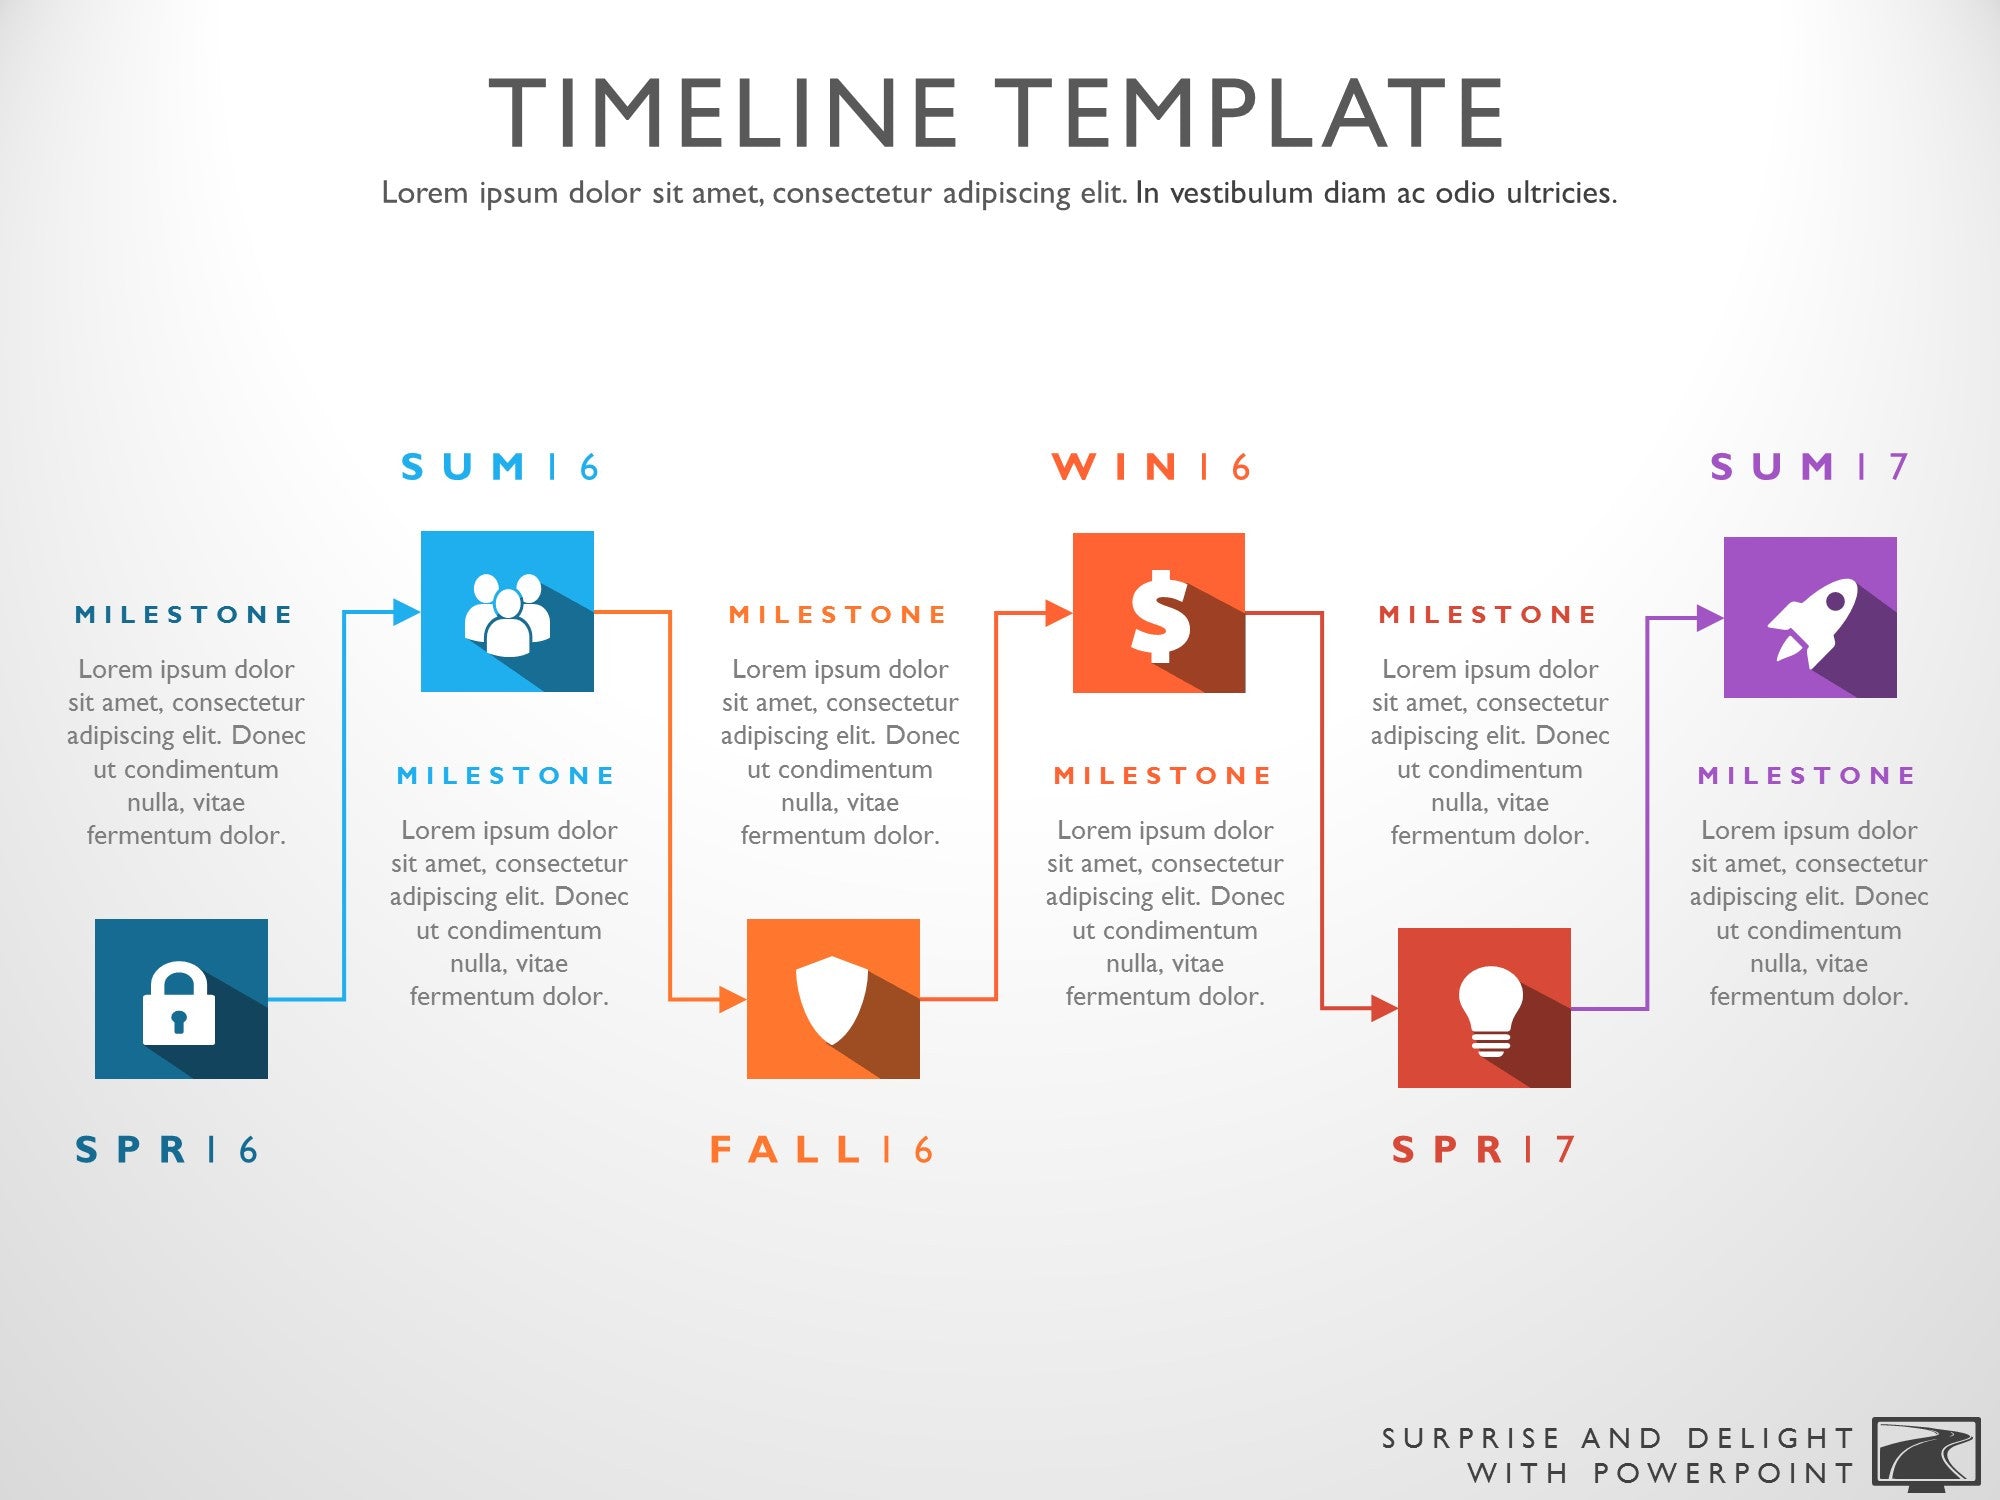 example of a timeline created using powerpoint